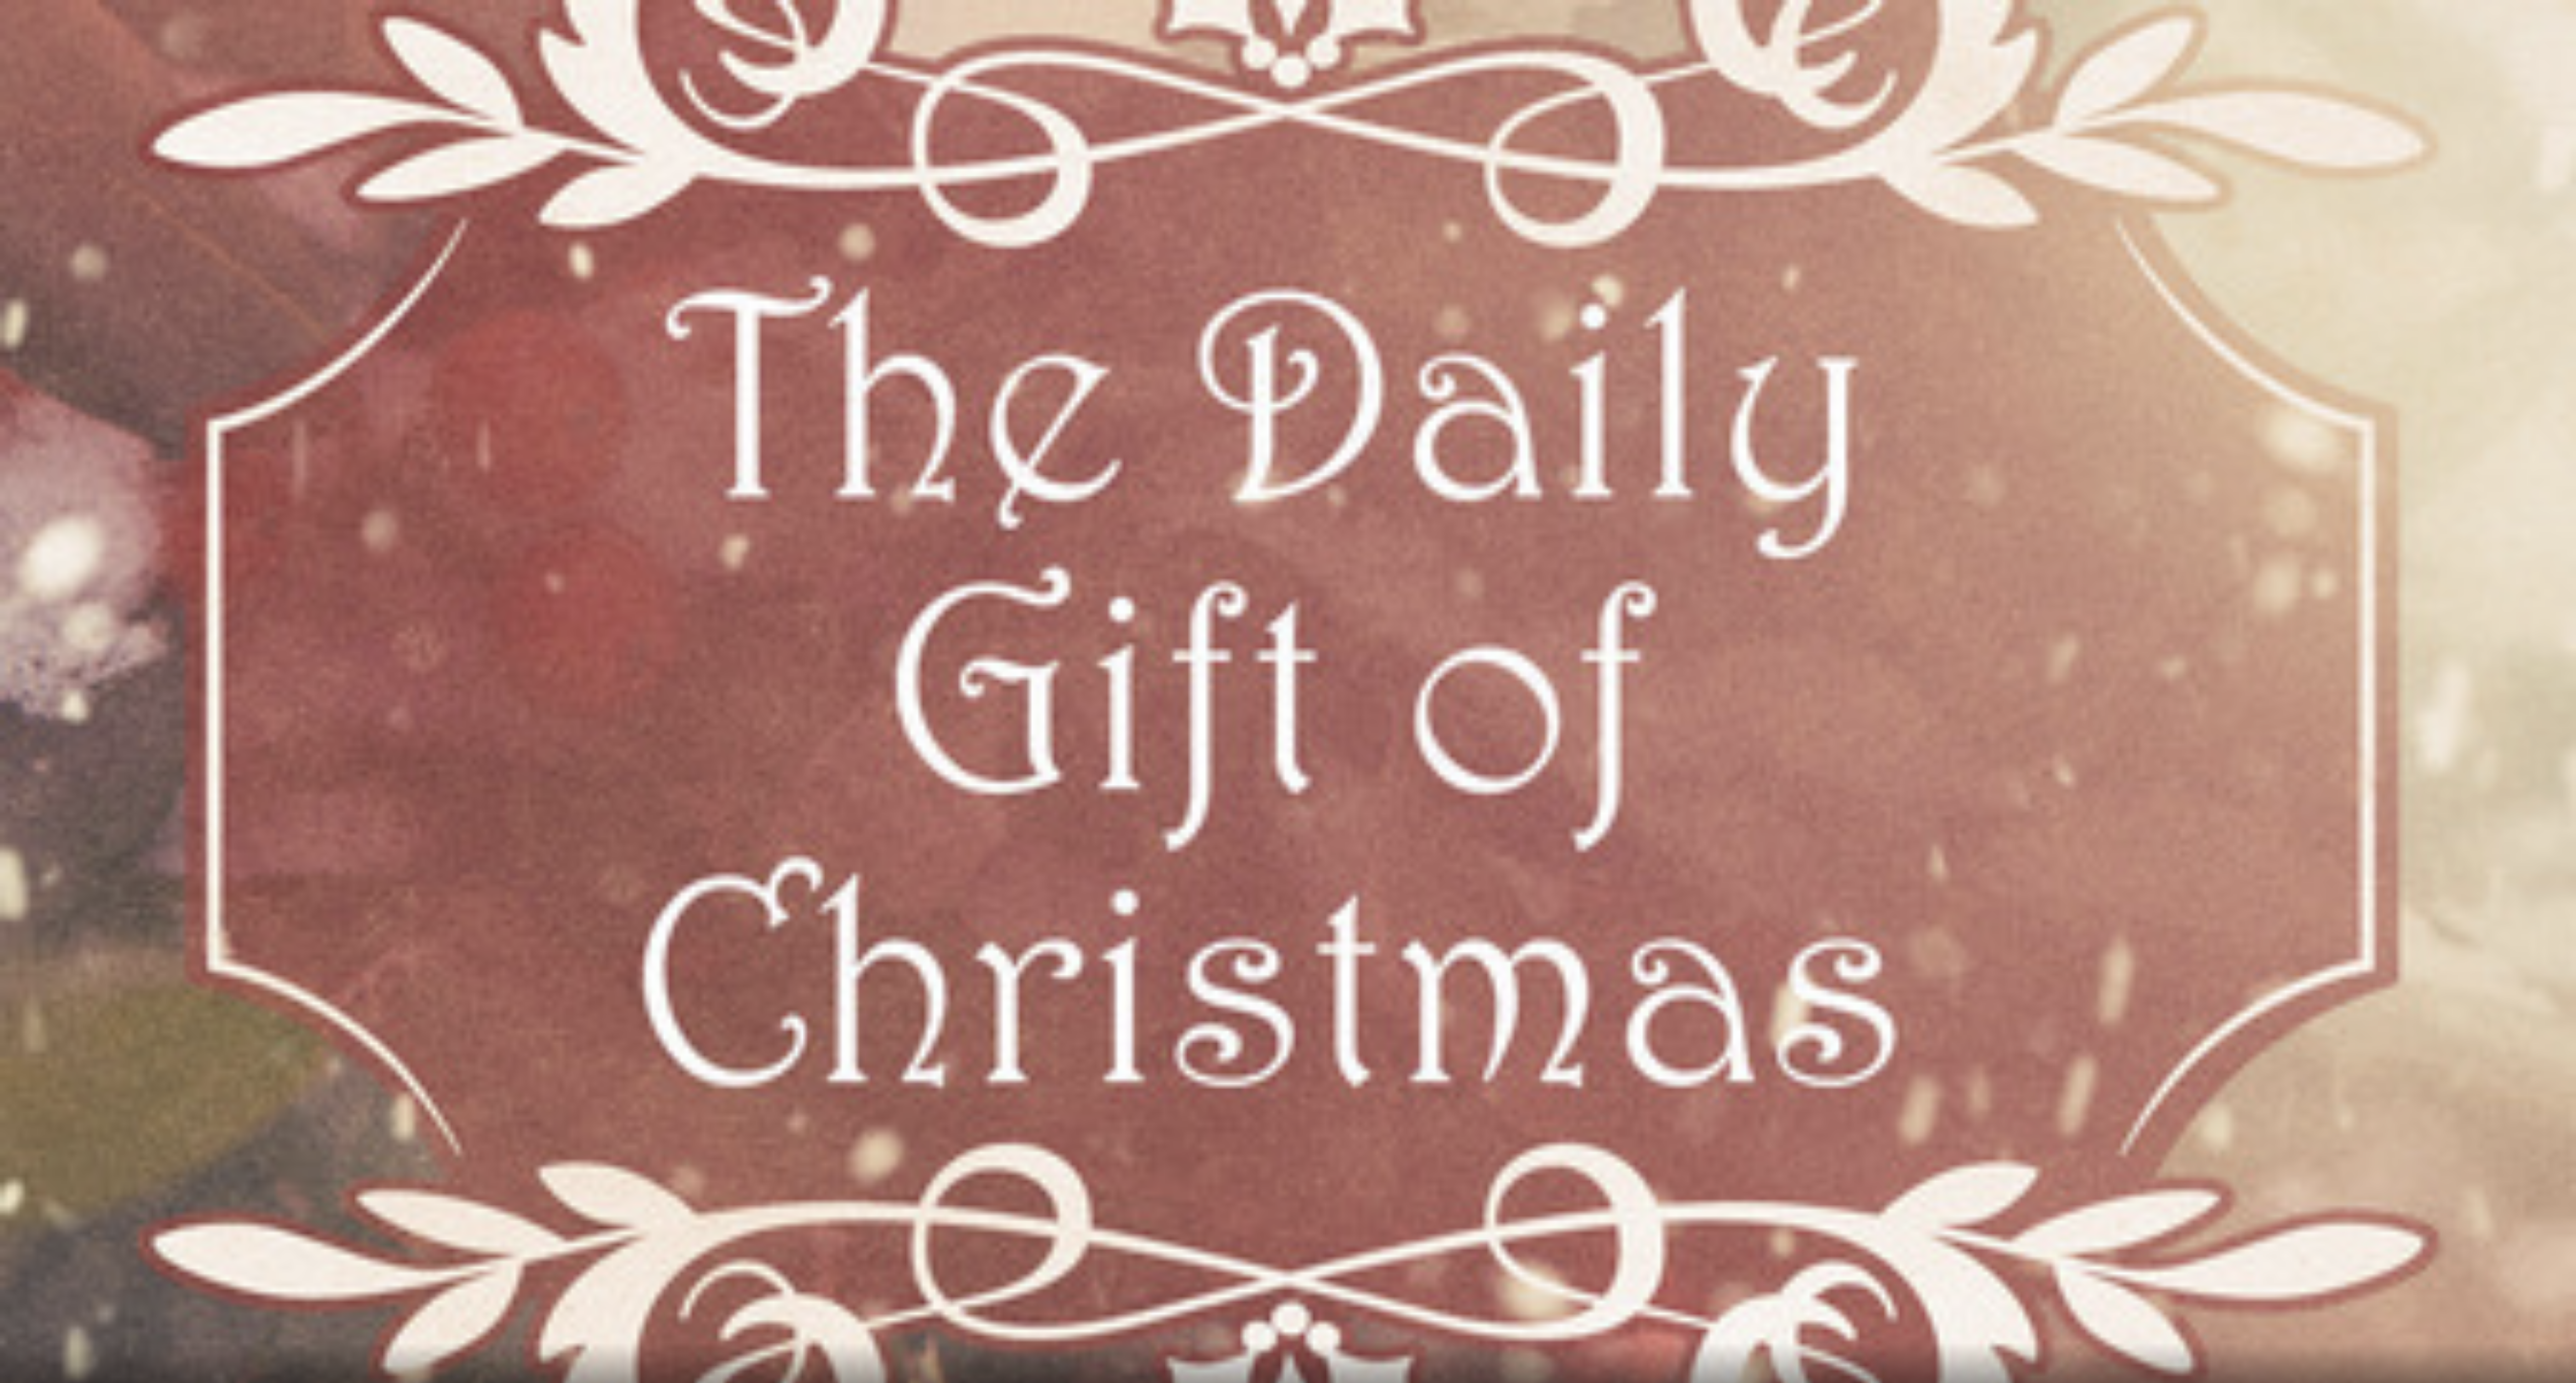 The Daily Gift of Christmas